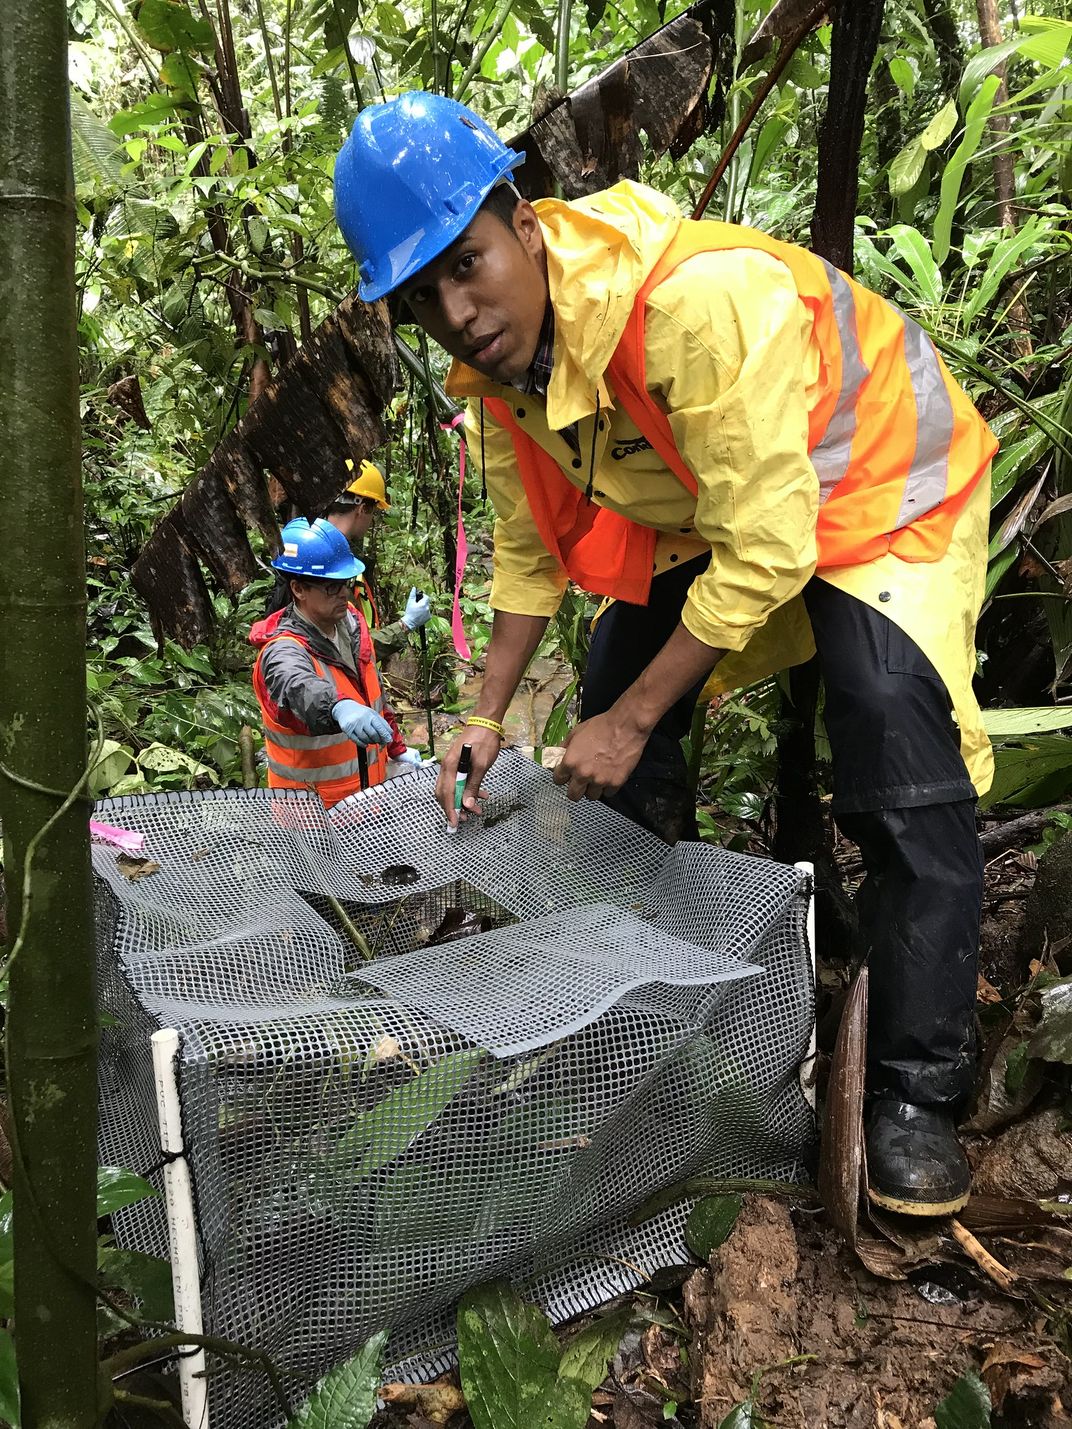 A researcher in a hardhat and yellow vest investigates a small mesh enclosure in the jungle.